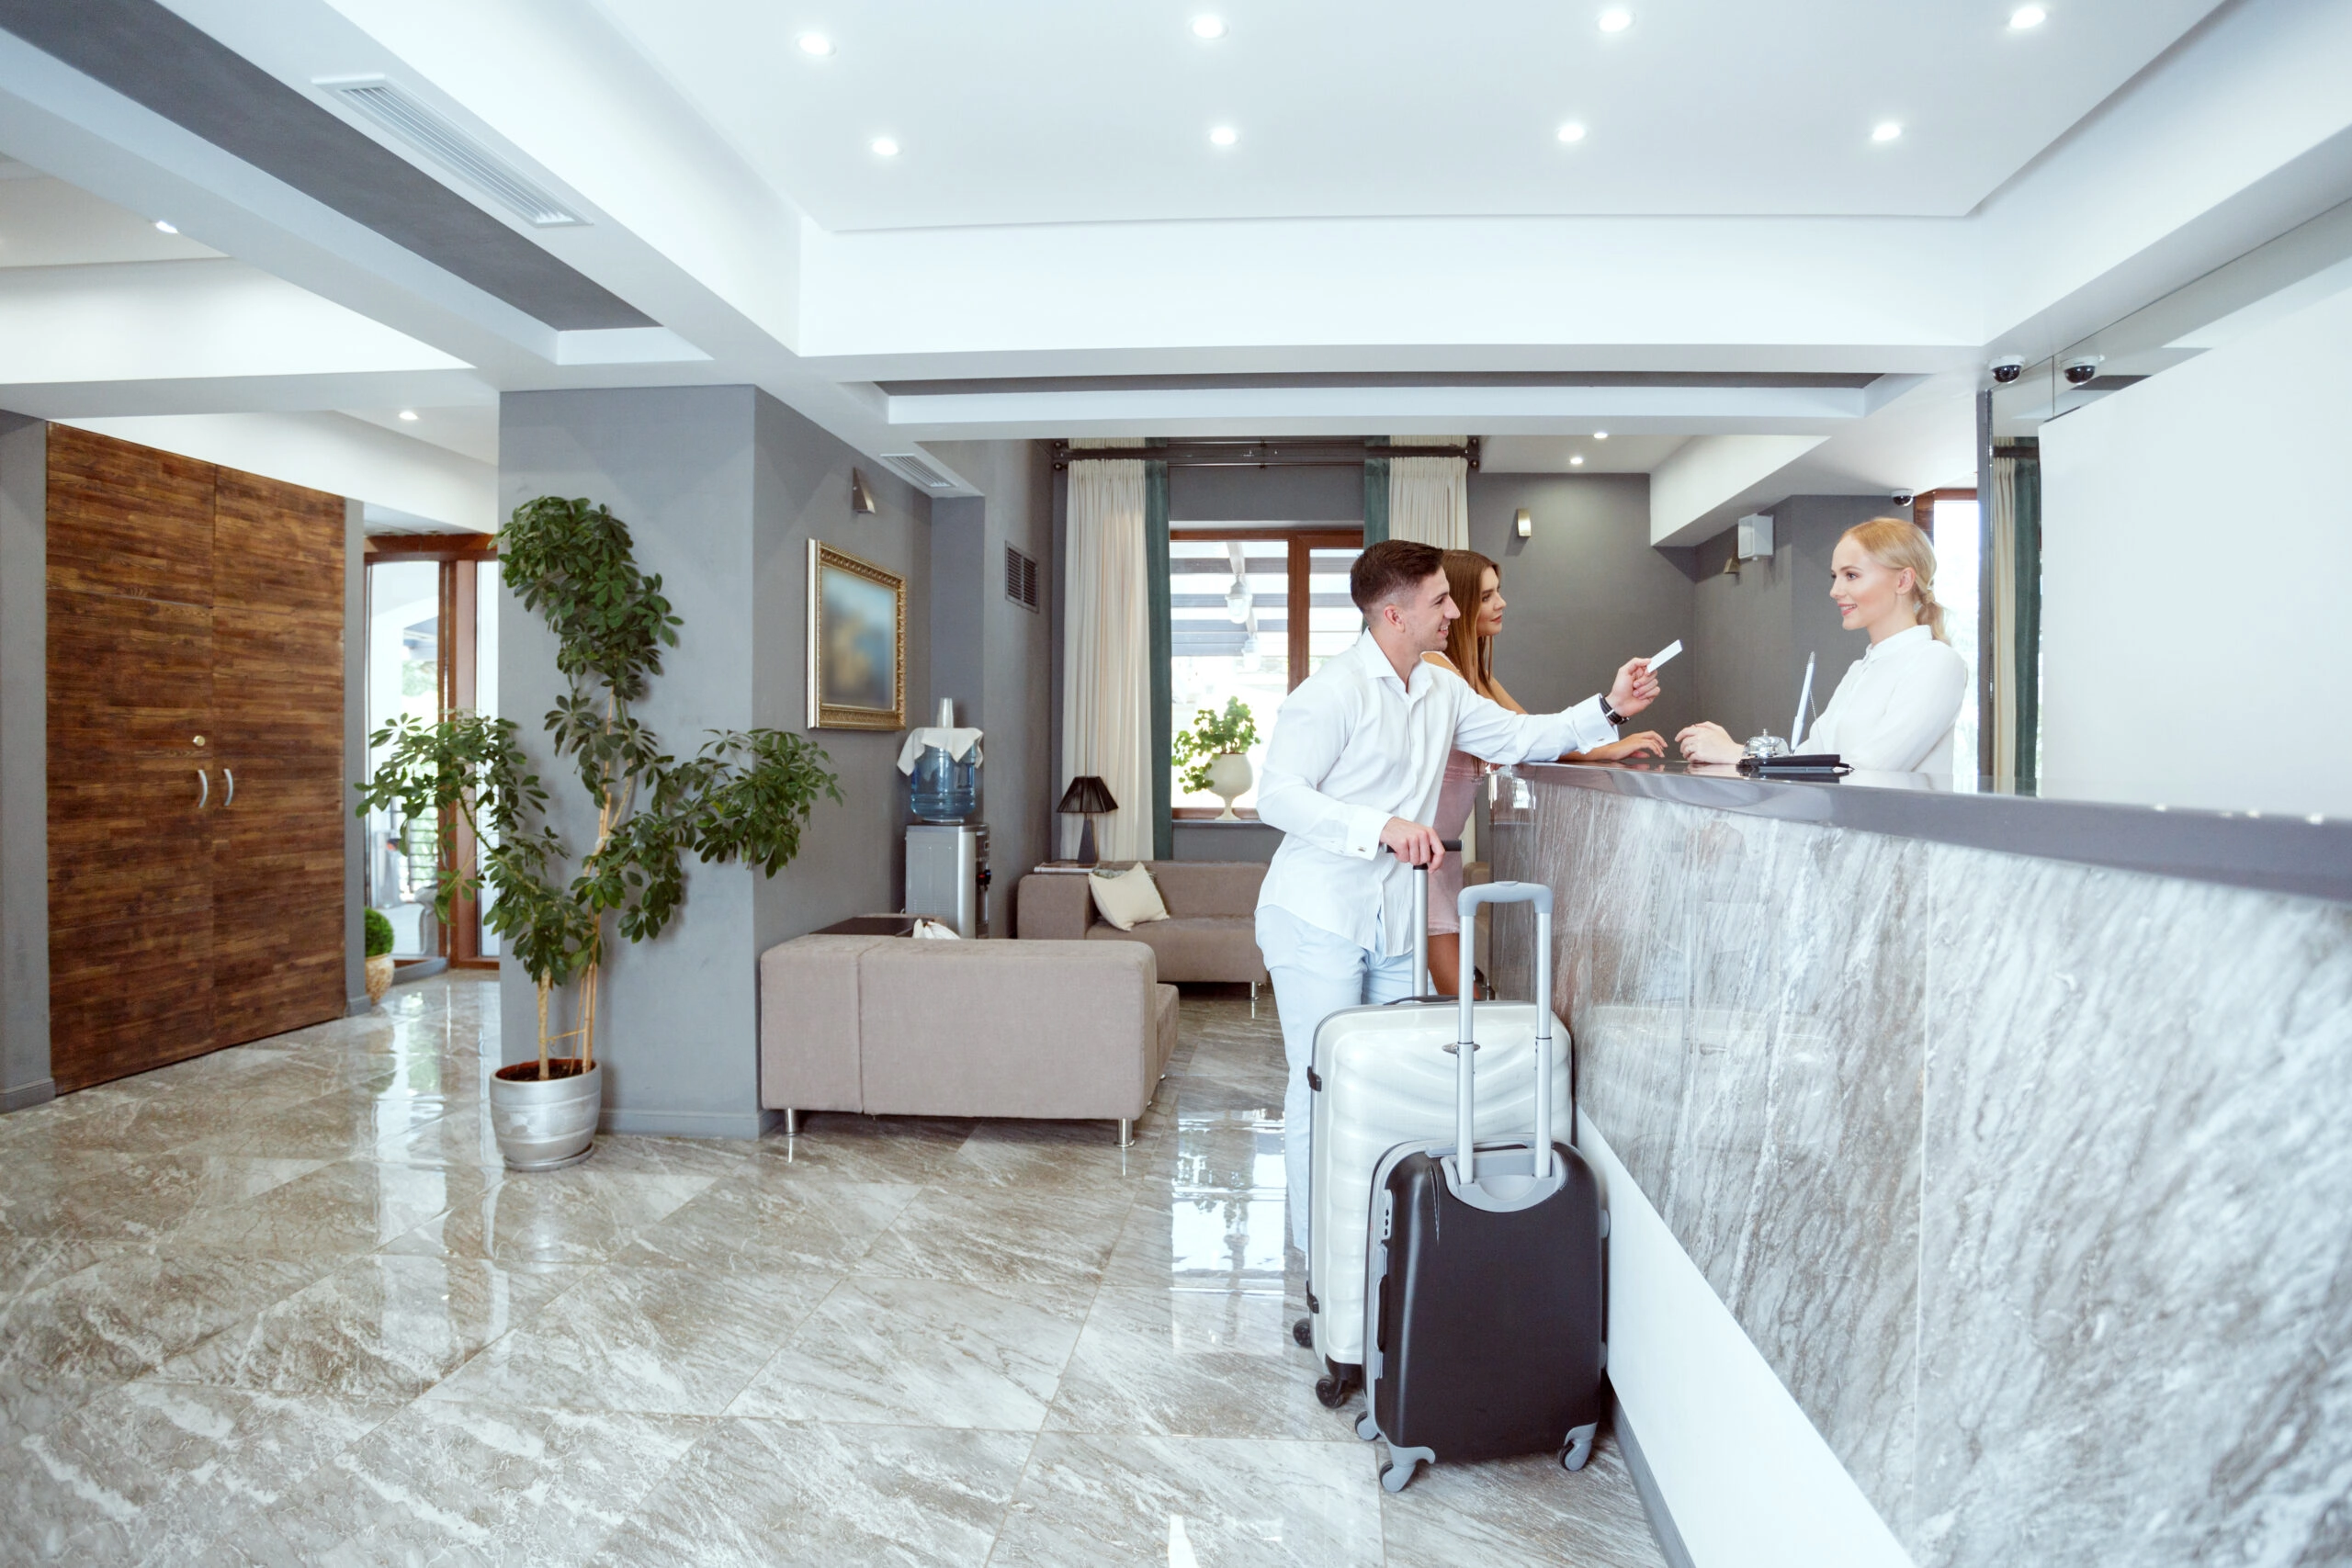 Despite Strong Employment Month, the Hospitality Sector Still Has Work to Do